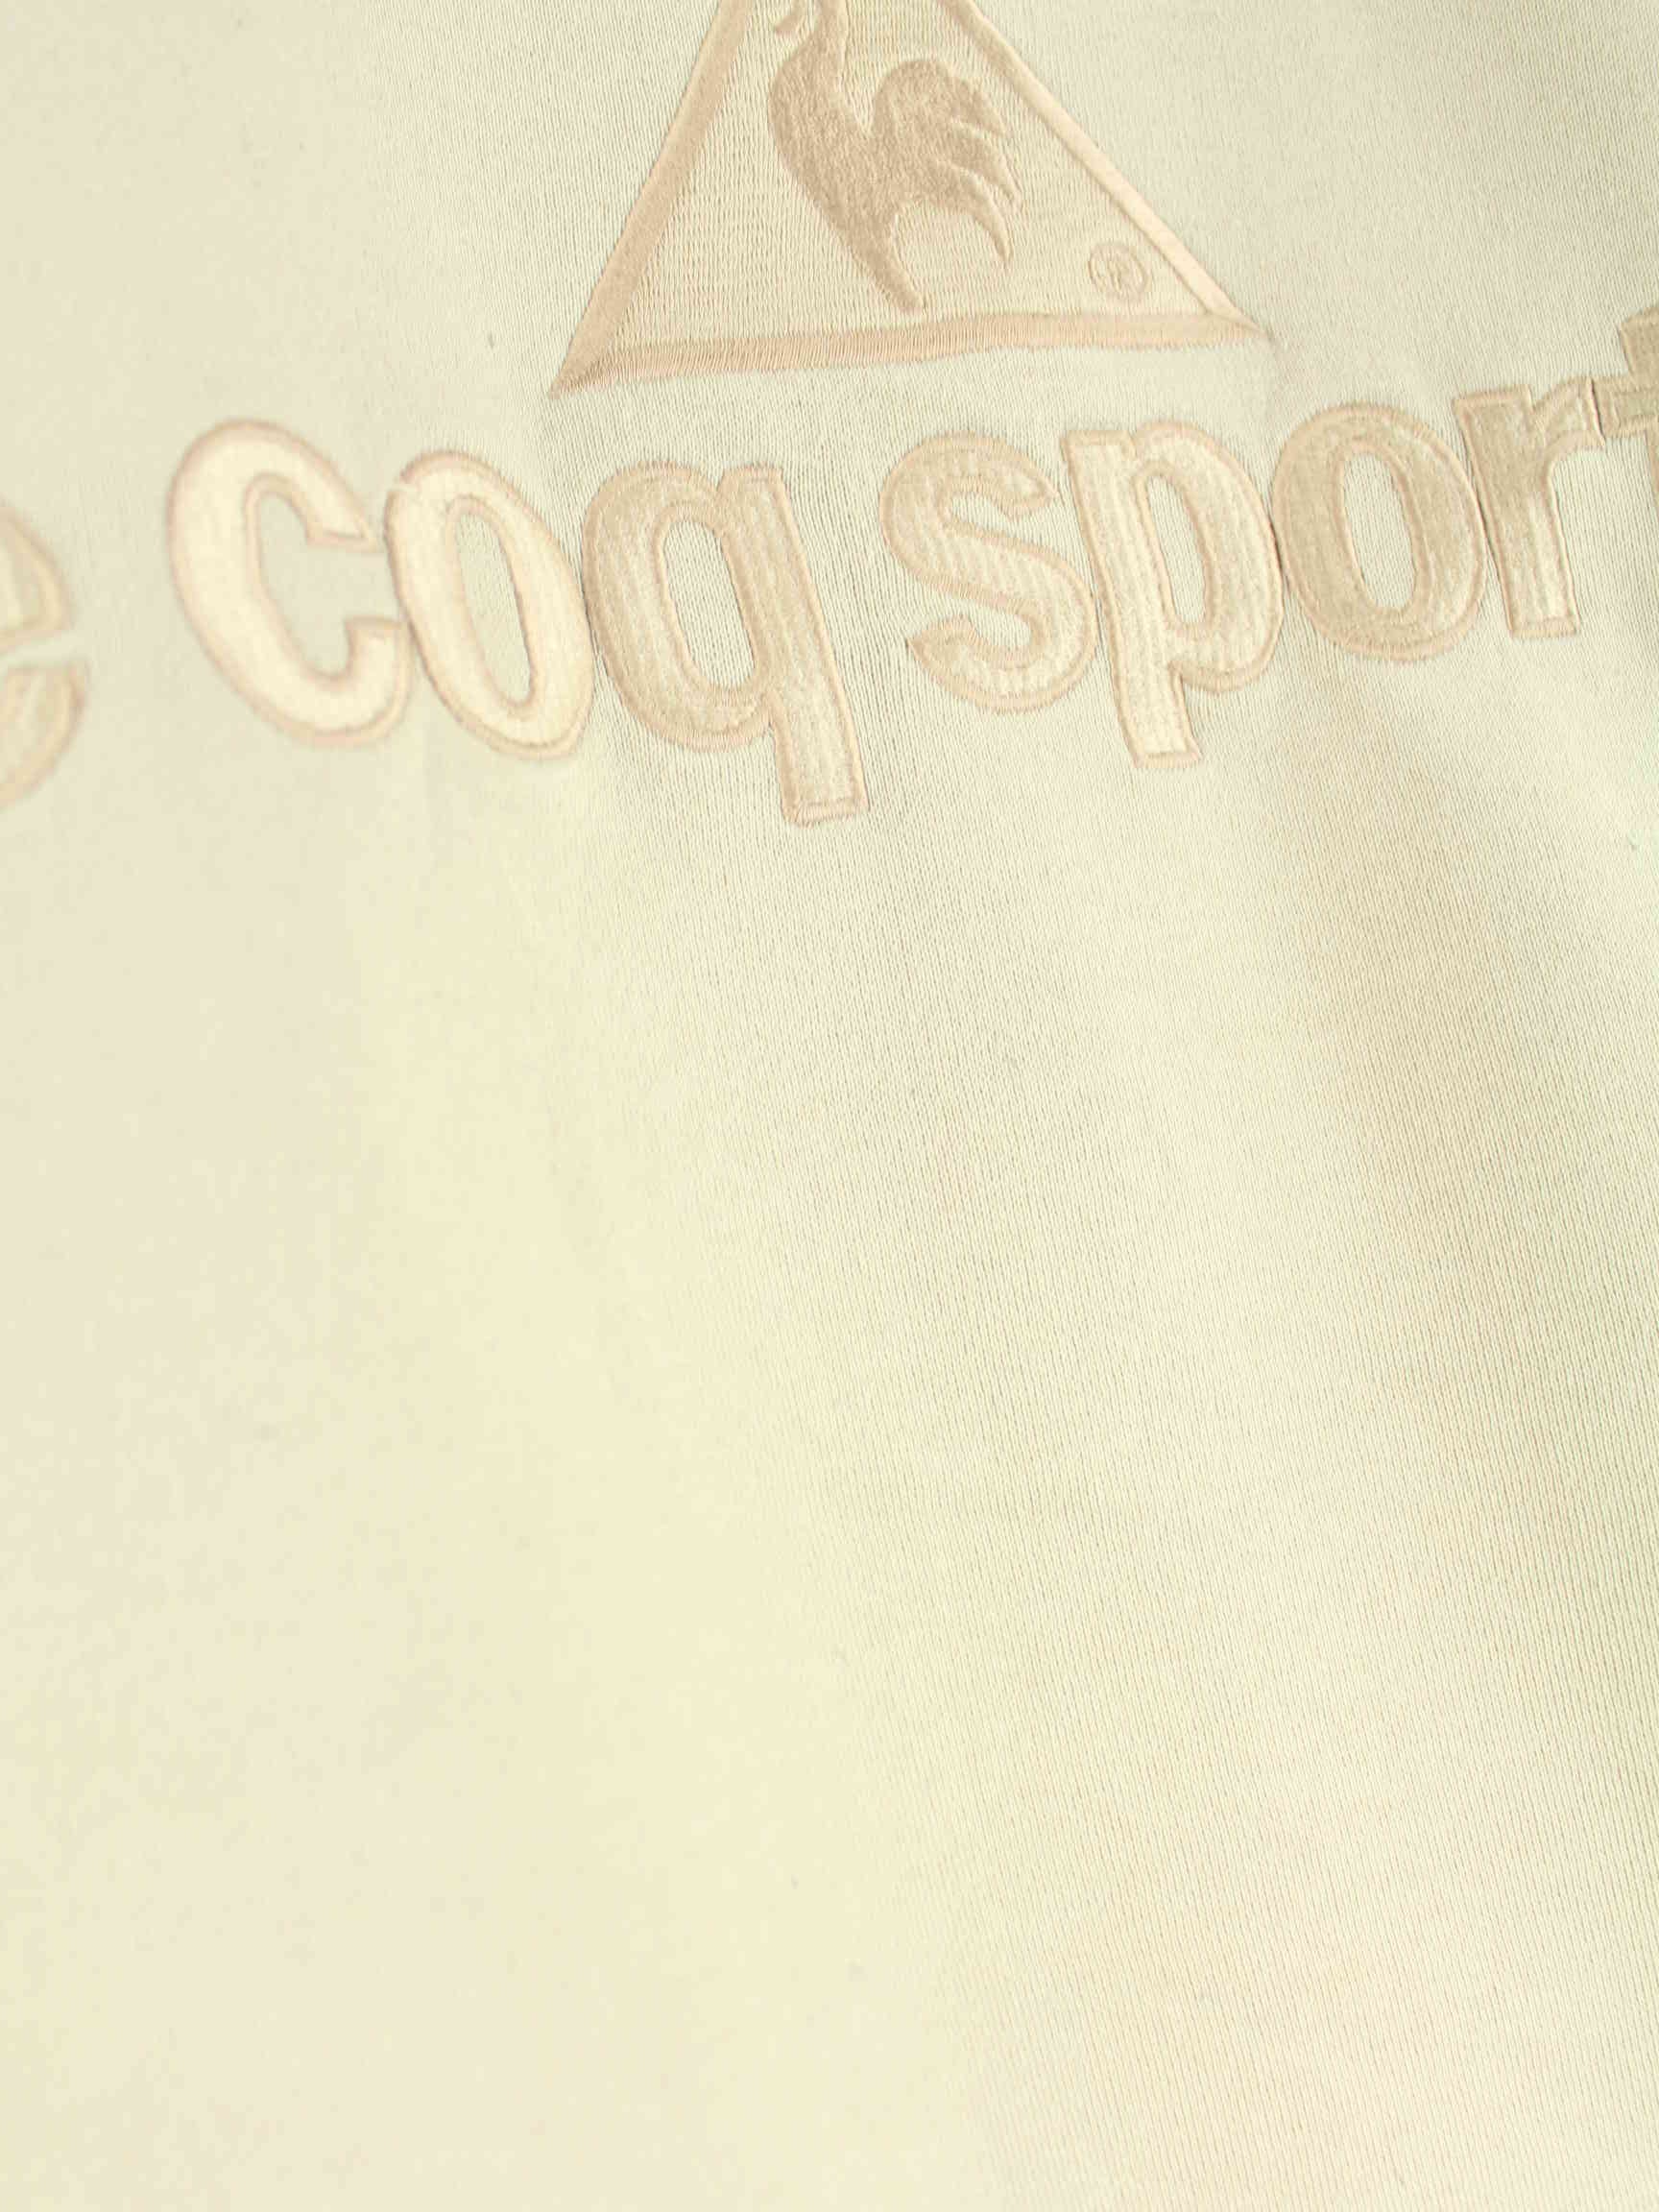 Le Coq Sportif 90s Vintage Embroidered Sweater Beige L (detail image 2)